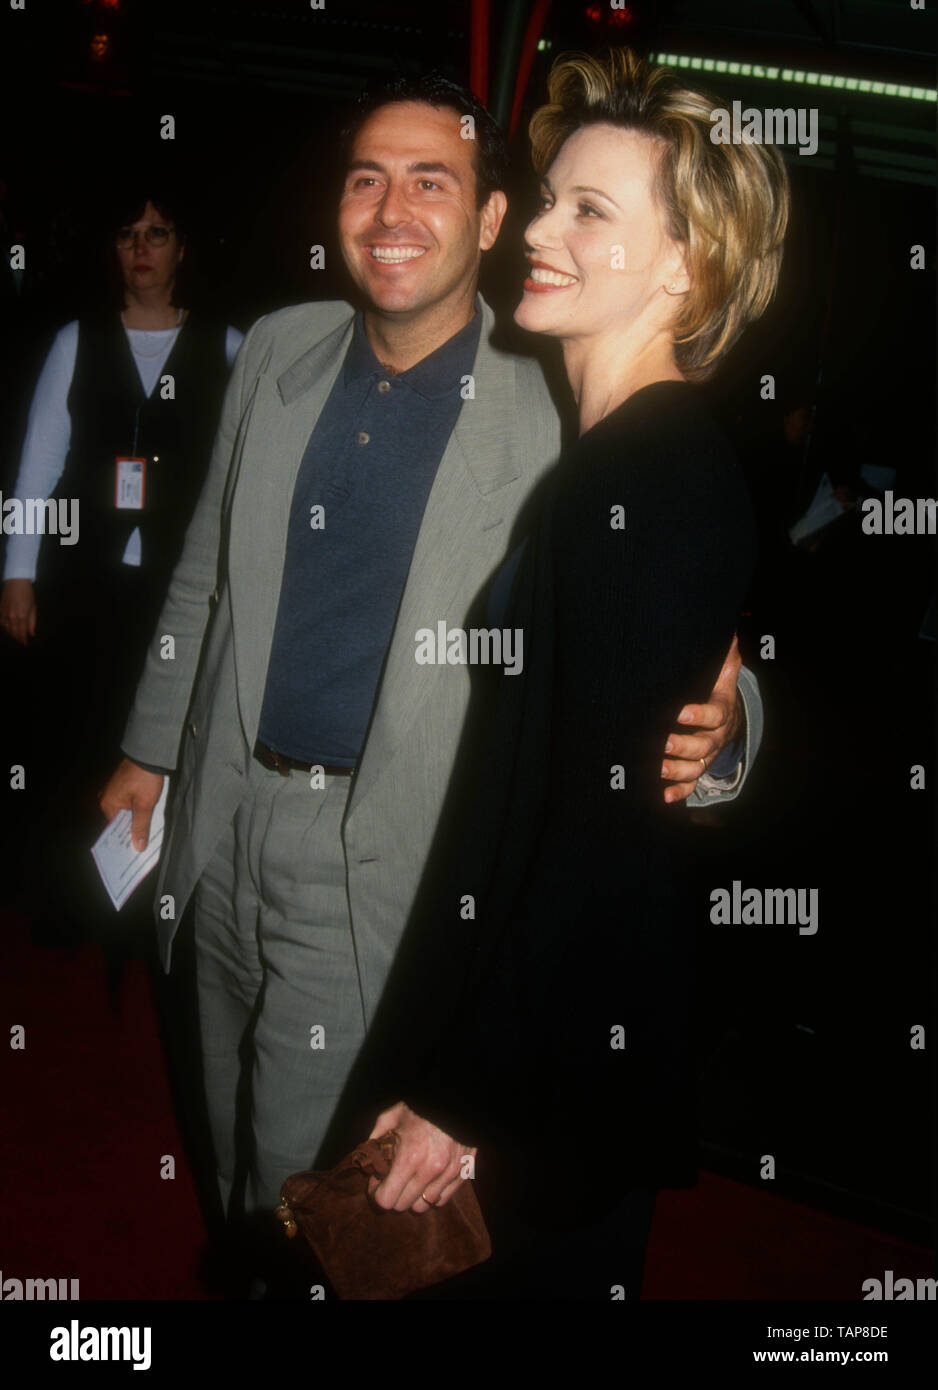 Hollywood, California, USA 4th May 1994  Actress Peggy Lipton attends 'APLA Fashion Show Honoring Isaac MIzrahi' on May 4, 1994 at Mann's Chinese Theatre in Hollywood, California, USA. Photo by Barry King/Alamy Stock Photo Stock Photo